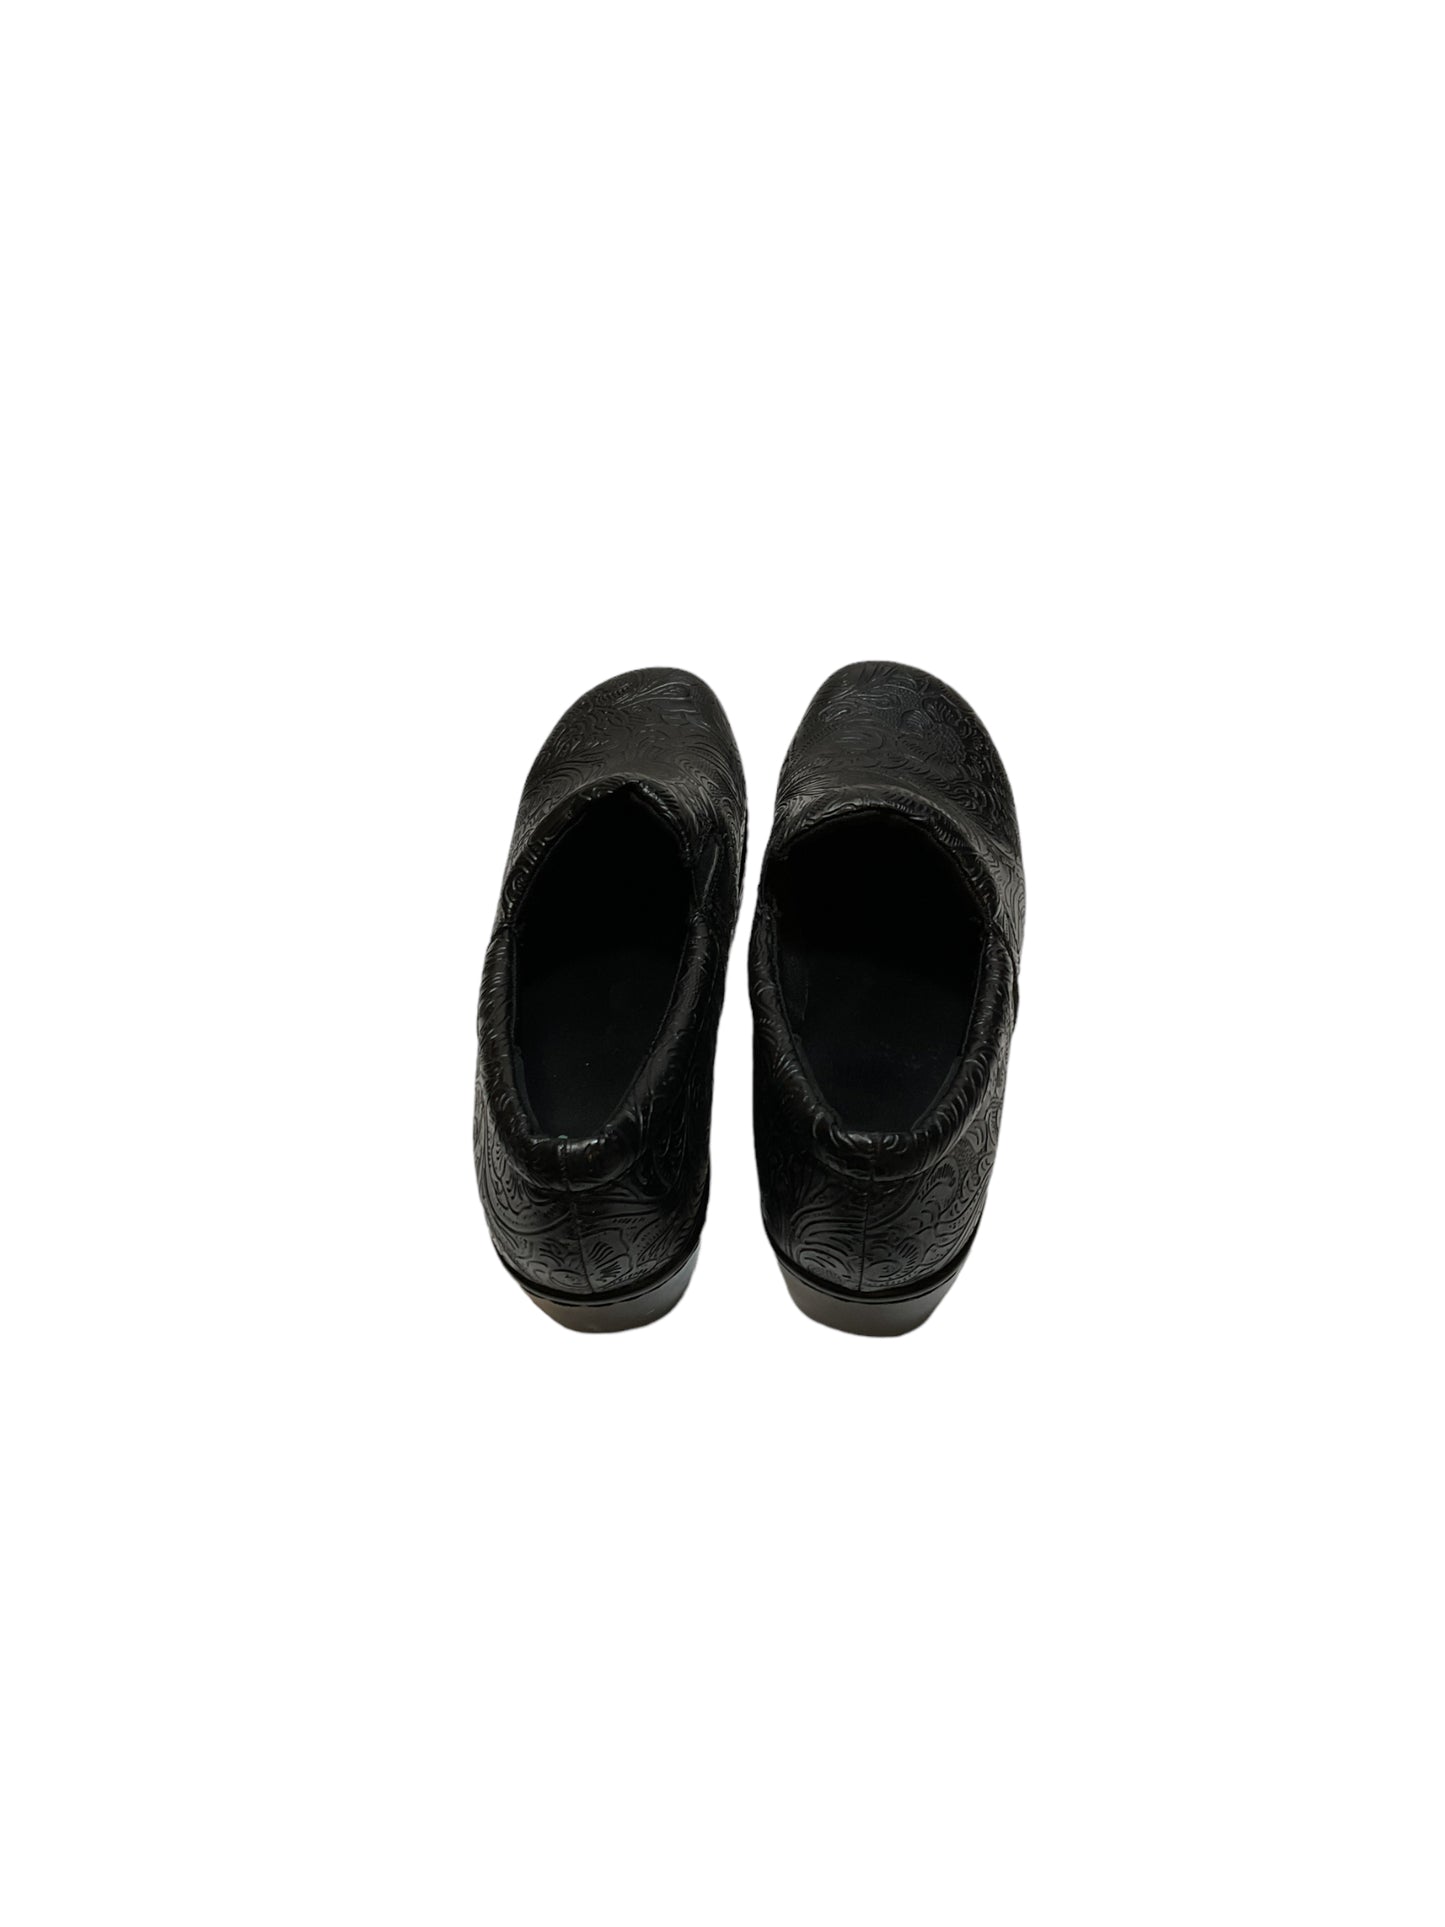 Shoes Flats Loafer Oxford By Yuu Collection  Size: 8